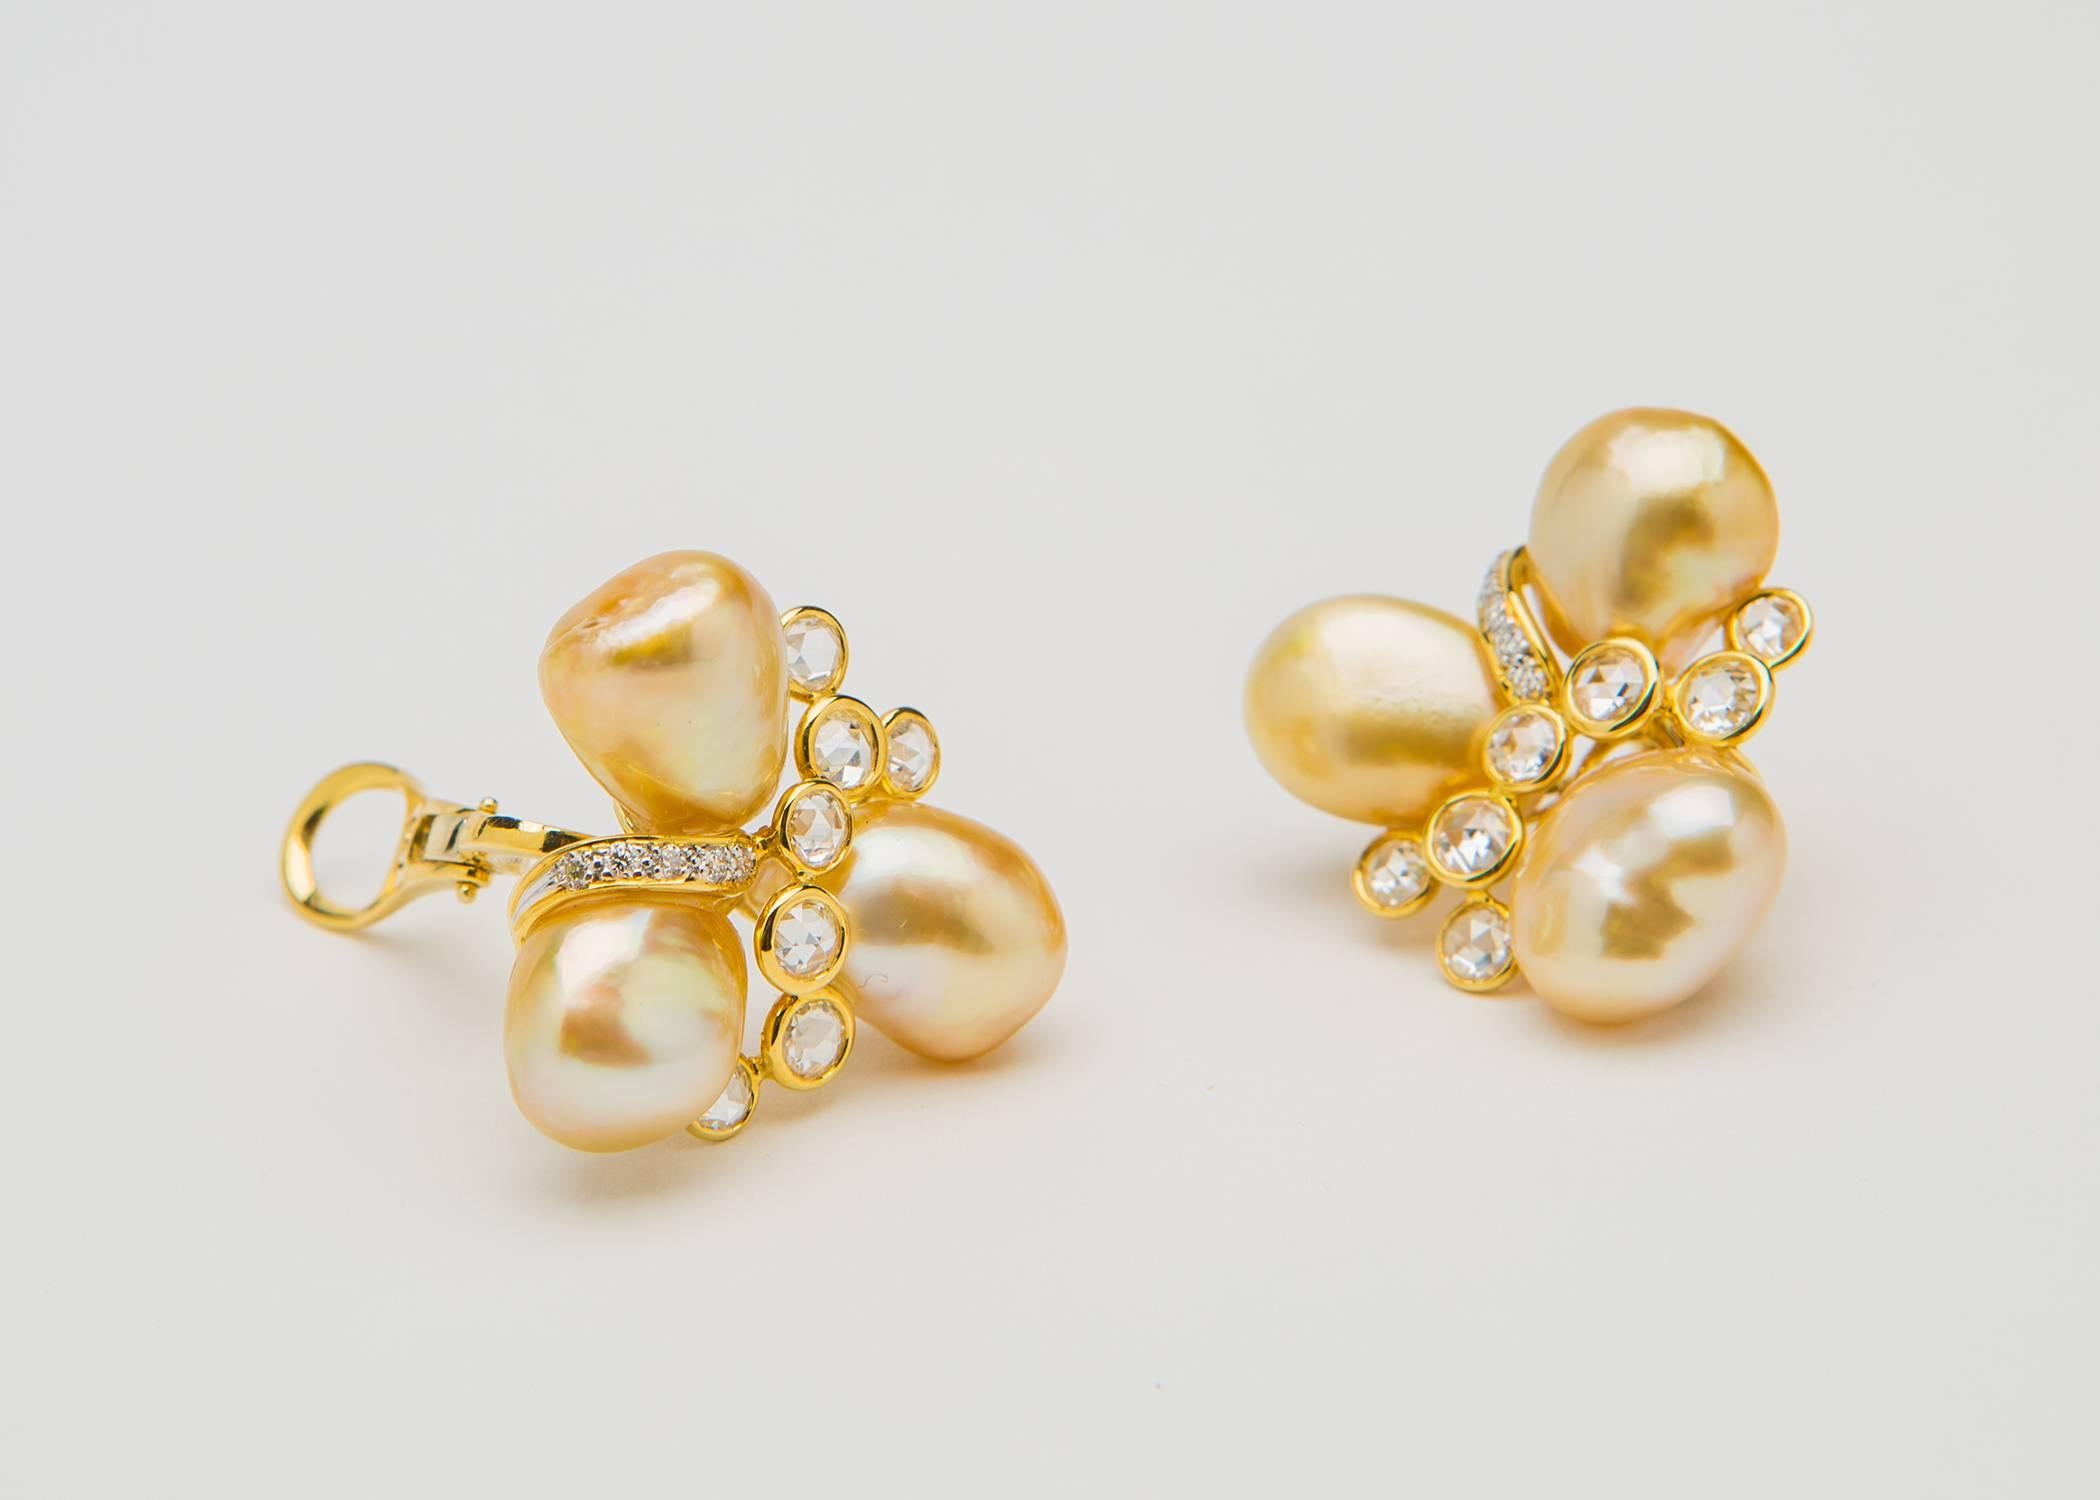 Rich golden Keshi pearls from the South Seas are accented with brilliant cut and unique rose cut diamonds all set in handmade mountings designed by legendary pearl company Assael. Just over 1 inch in size.